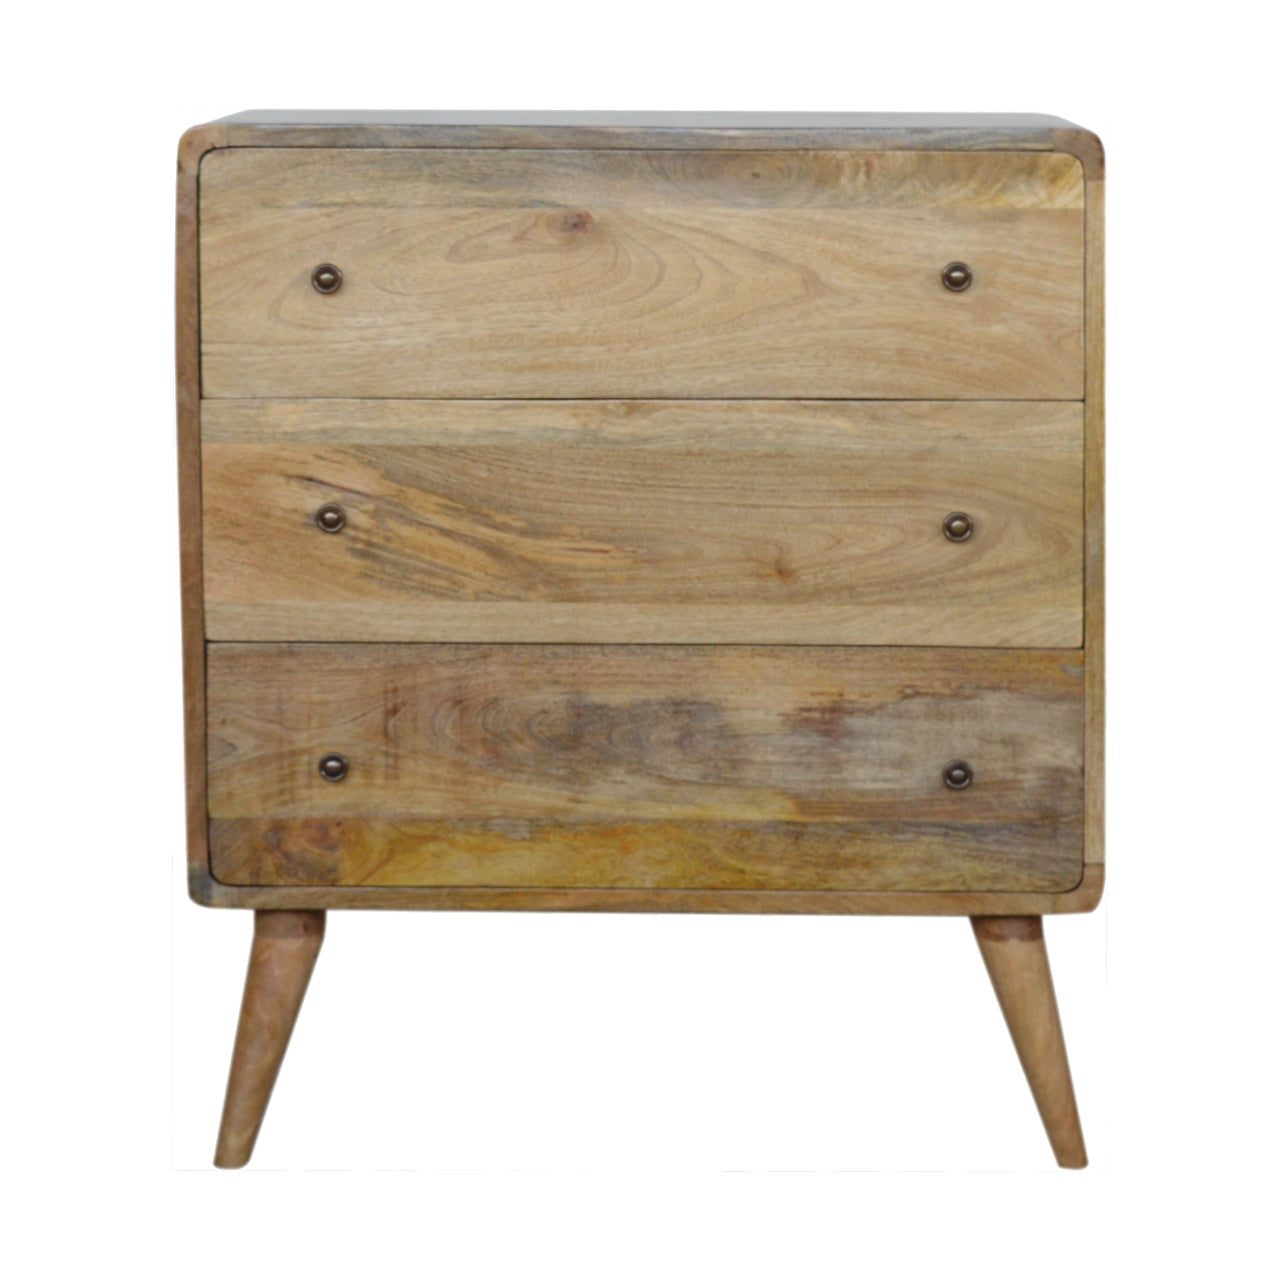 Modal Handmade solid wood chest of 3 drawers in an oak-ish natural finish | malletandplane.com